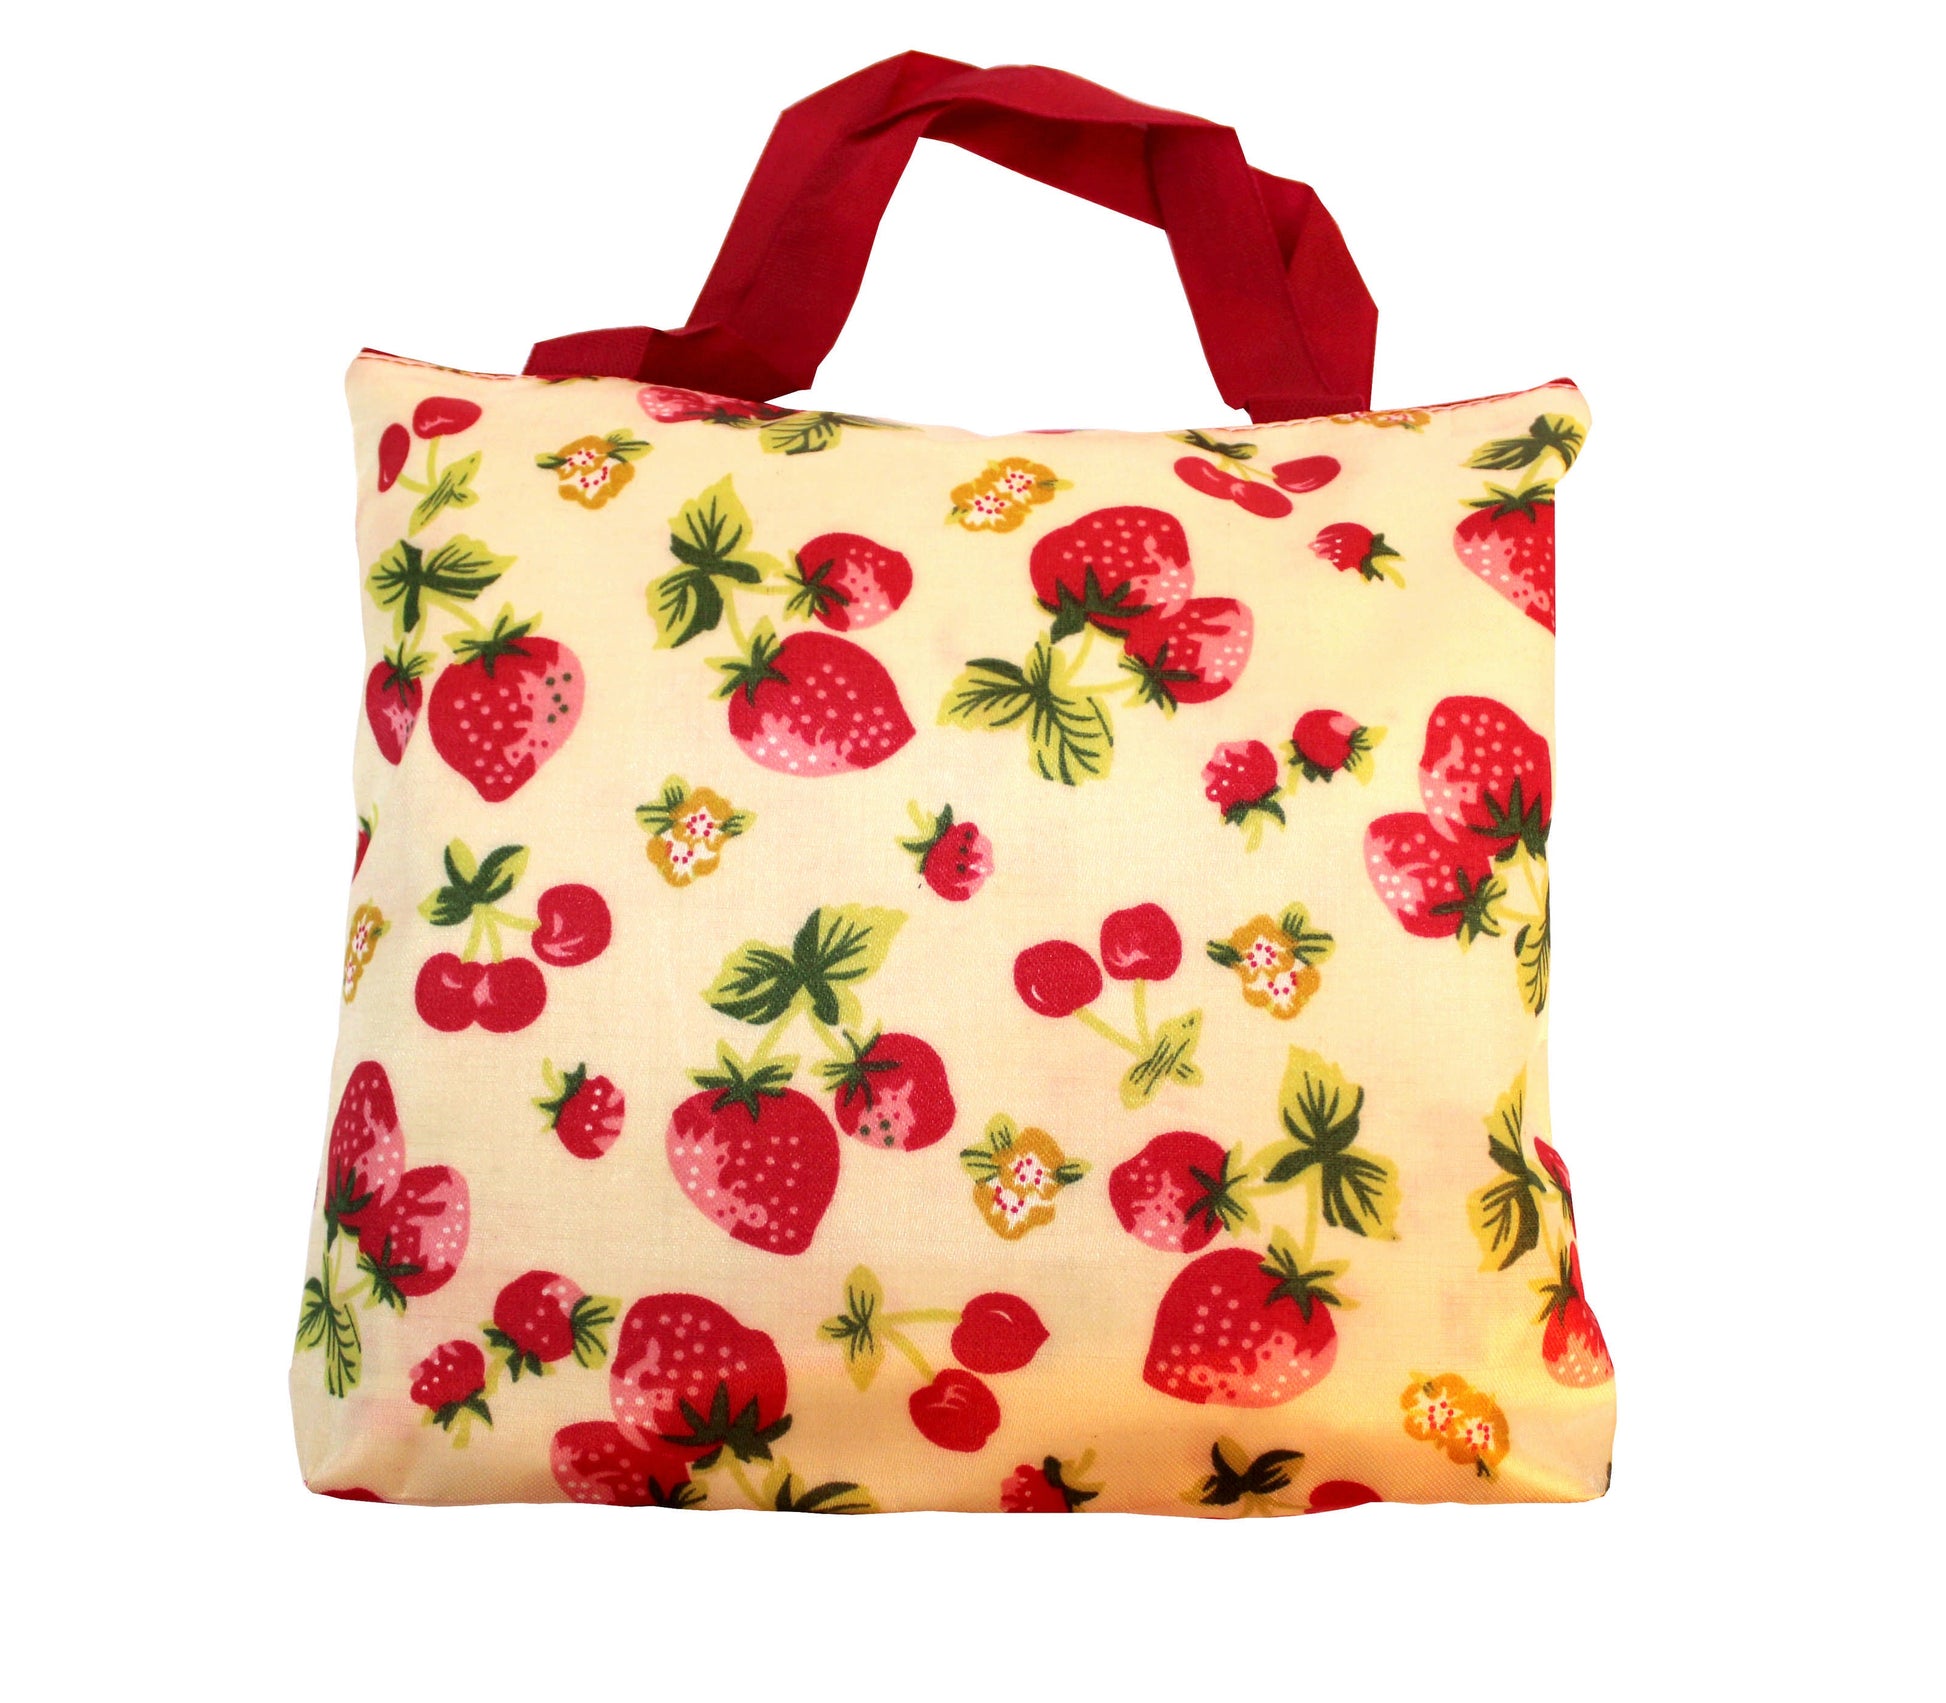 Indian Petals Imported Durable Canvas Printed multi purpose Bag with handles for girls and ladies, Theme Fruits, Size Large